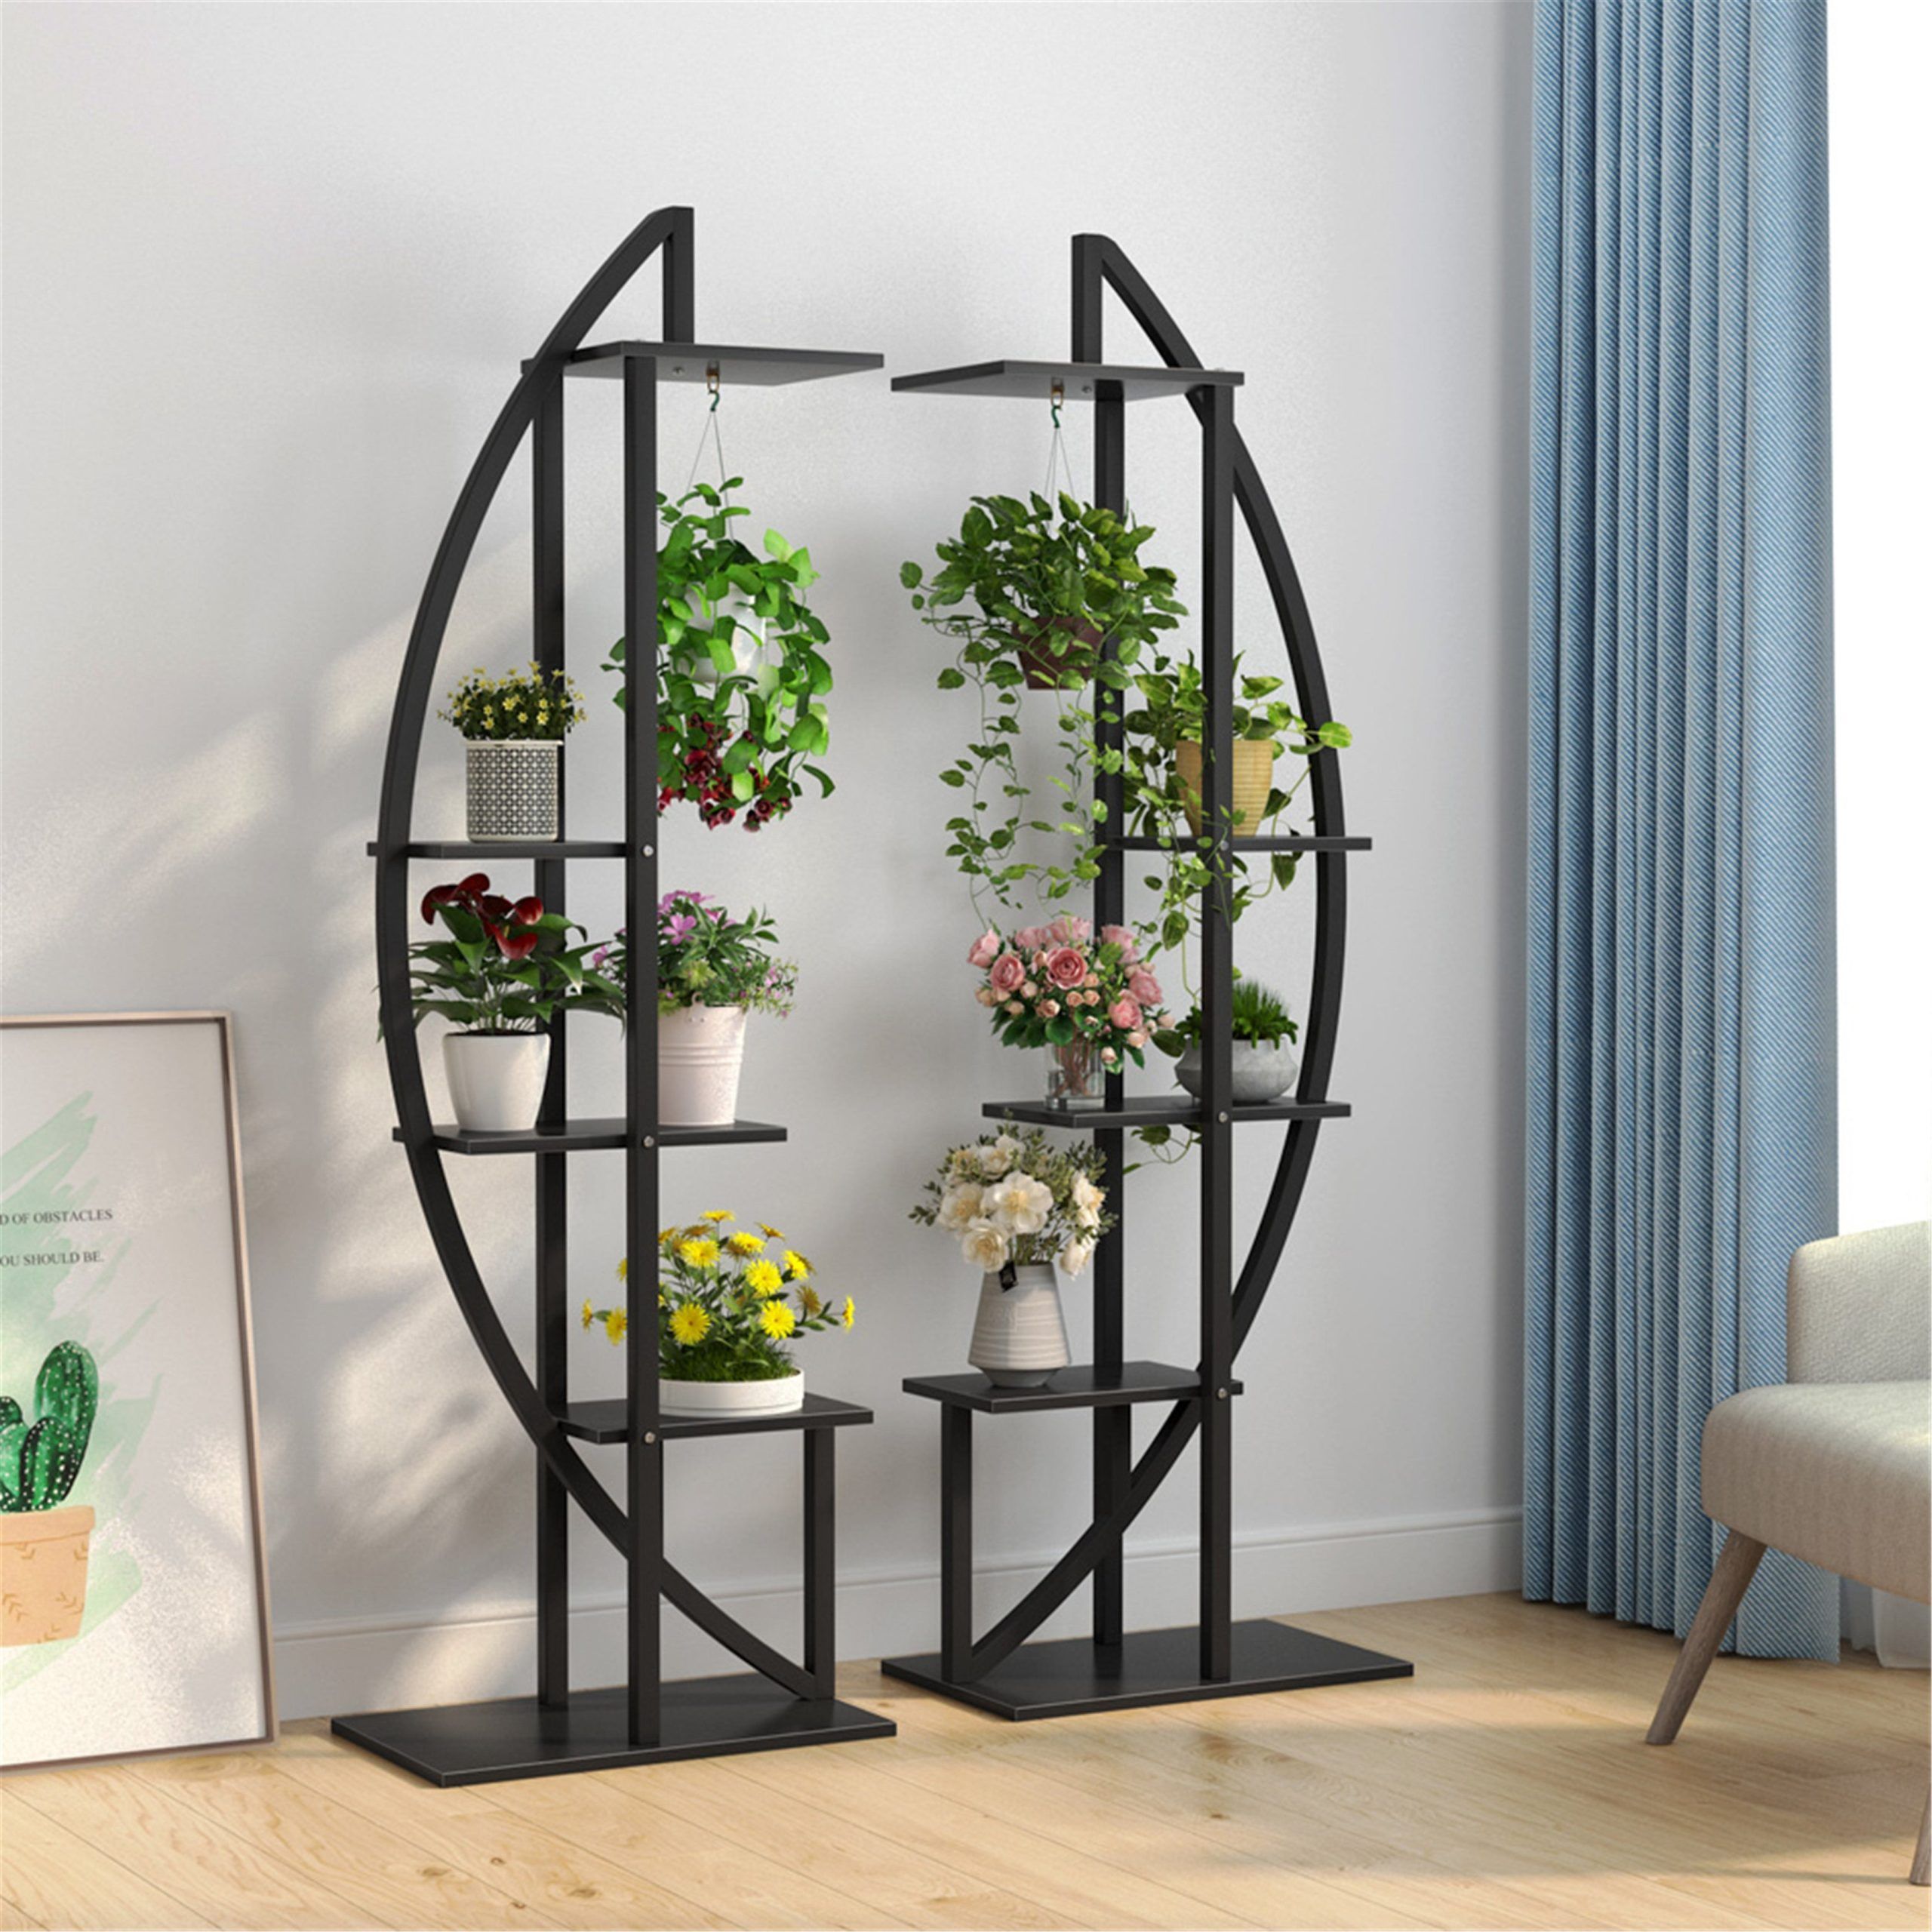 5 Tier Plant Flower Stands, Curved Display Shelves With Hooks,flower Stand  Shelves – Overstock – 32764613 With Particle Board Plant Stands (View 9 of 15)